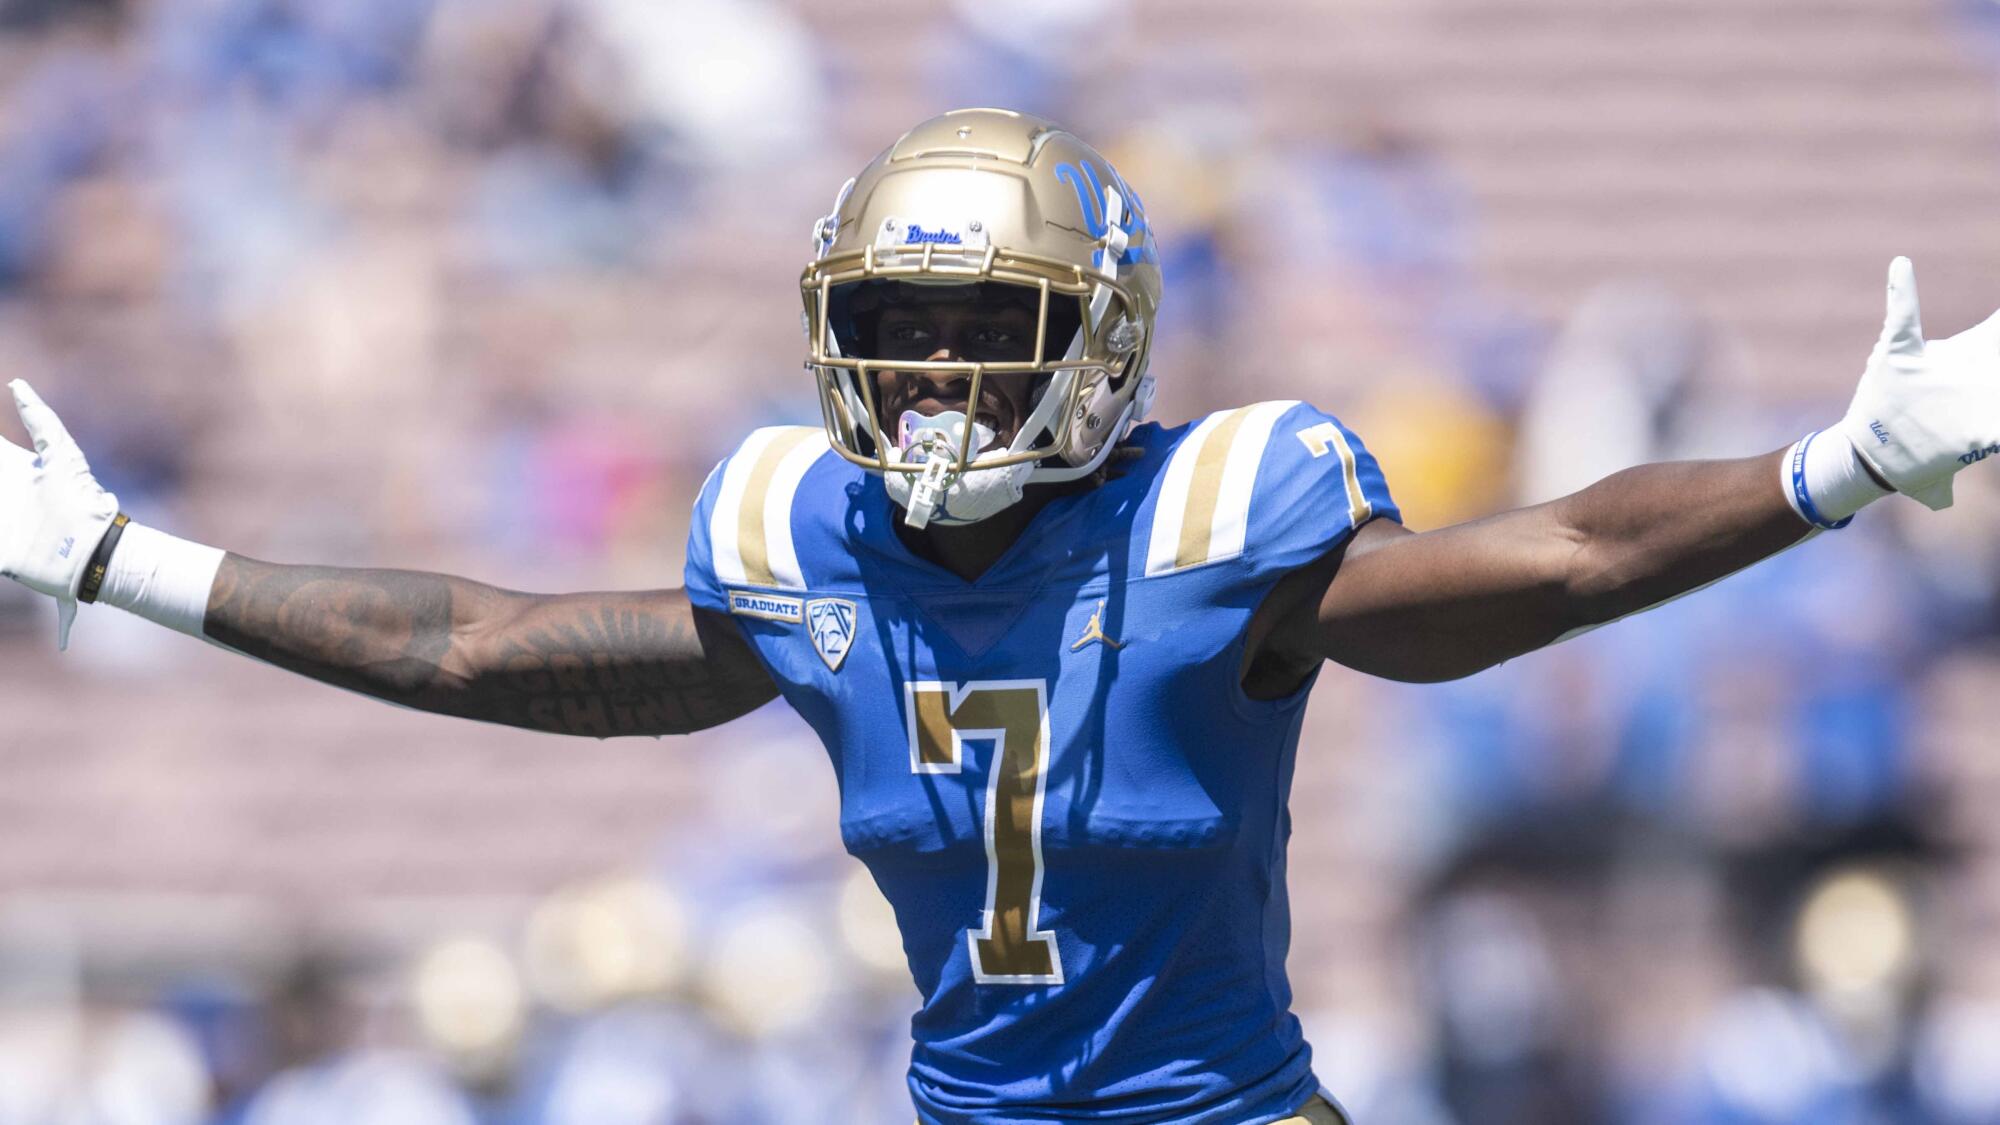 UCLA defensive back Mo Osling III during a game at the Rose Bowl.